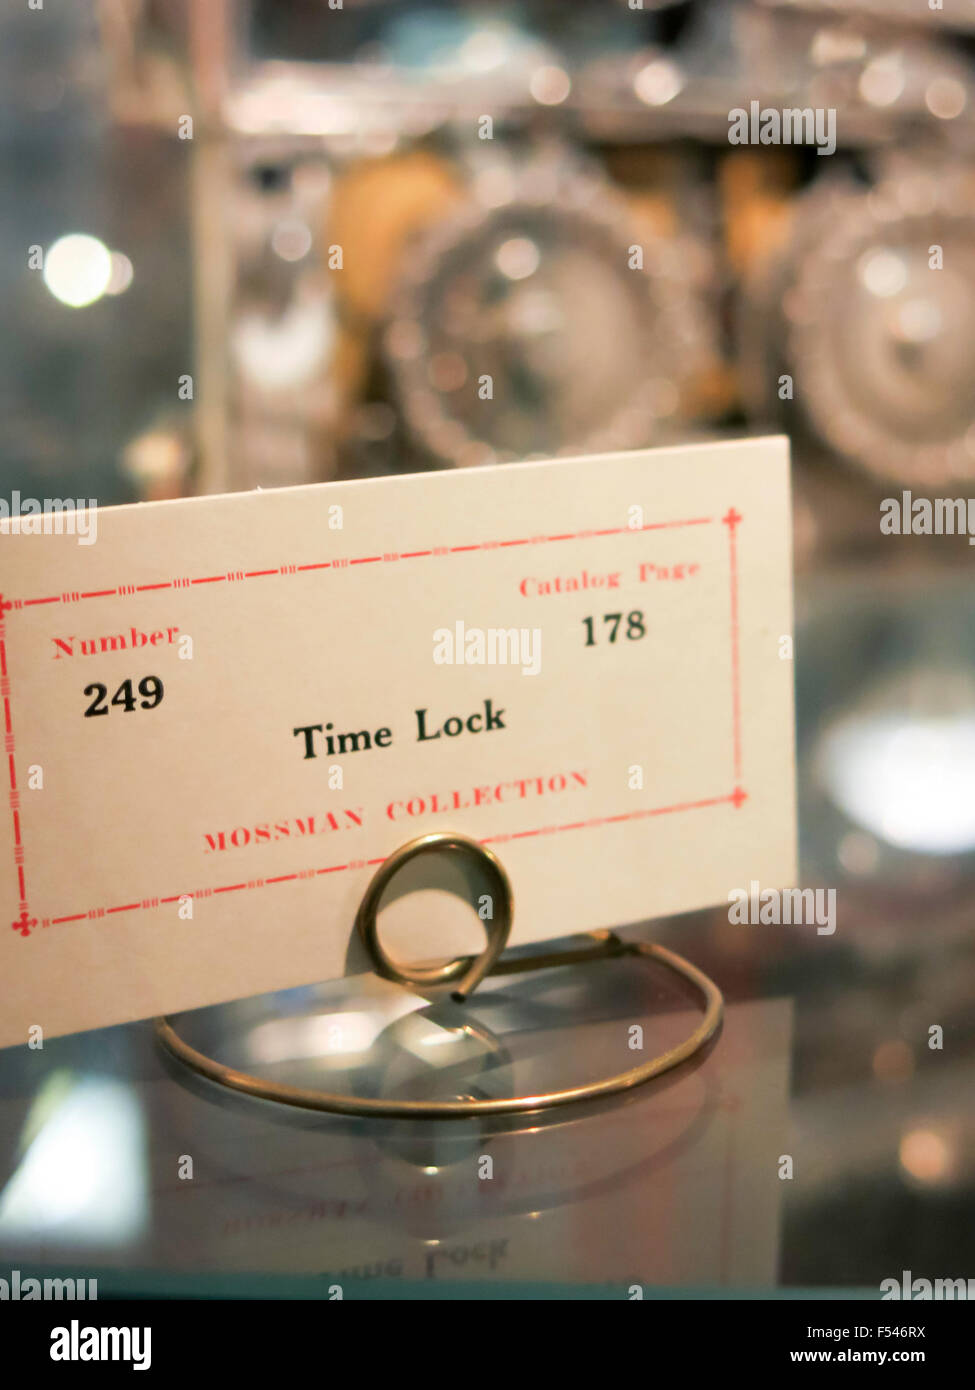 John M. Mossman Lock Collection at The General Society of Mechanics & Tradesmen of the City of New York, NYC Stock Photo